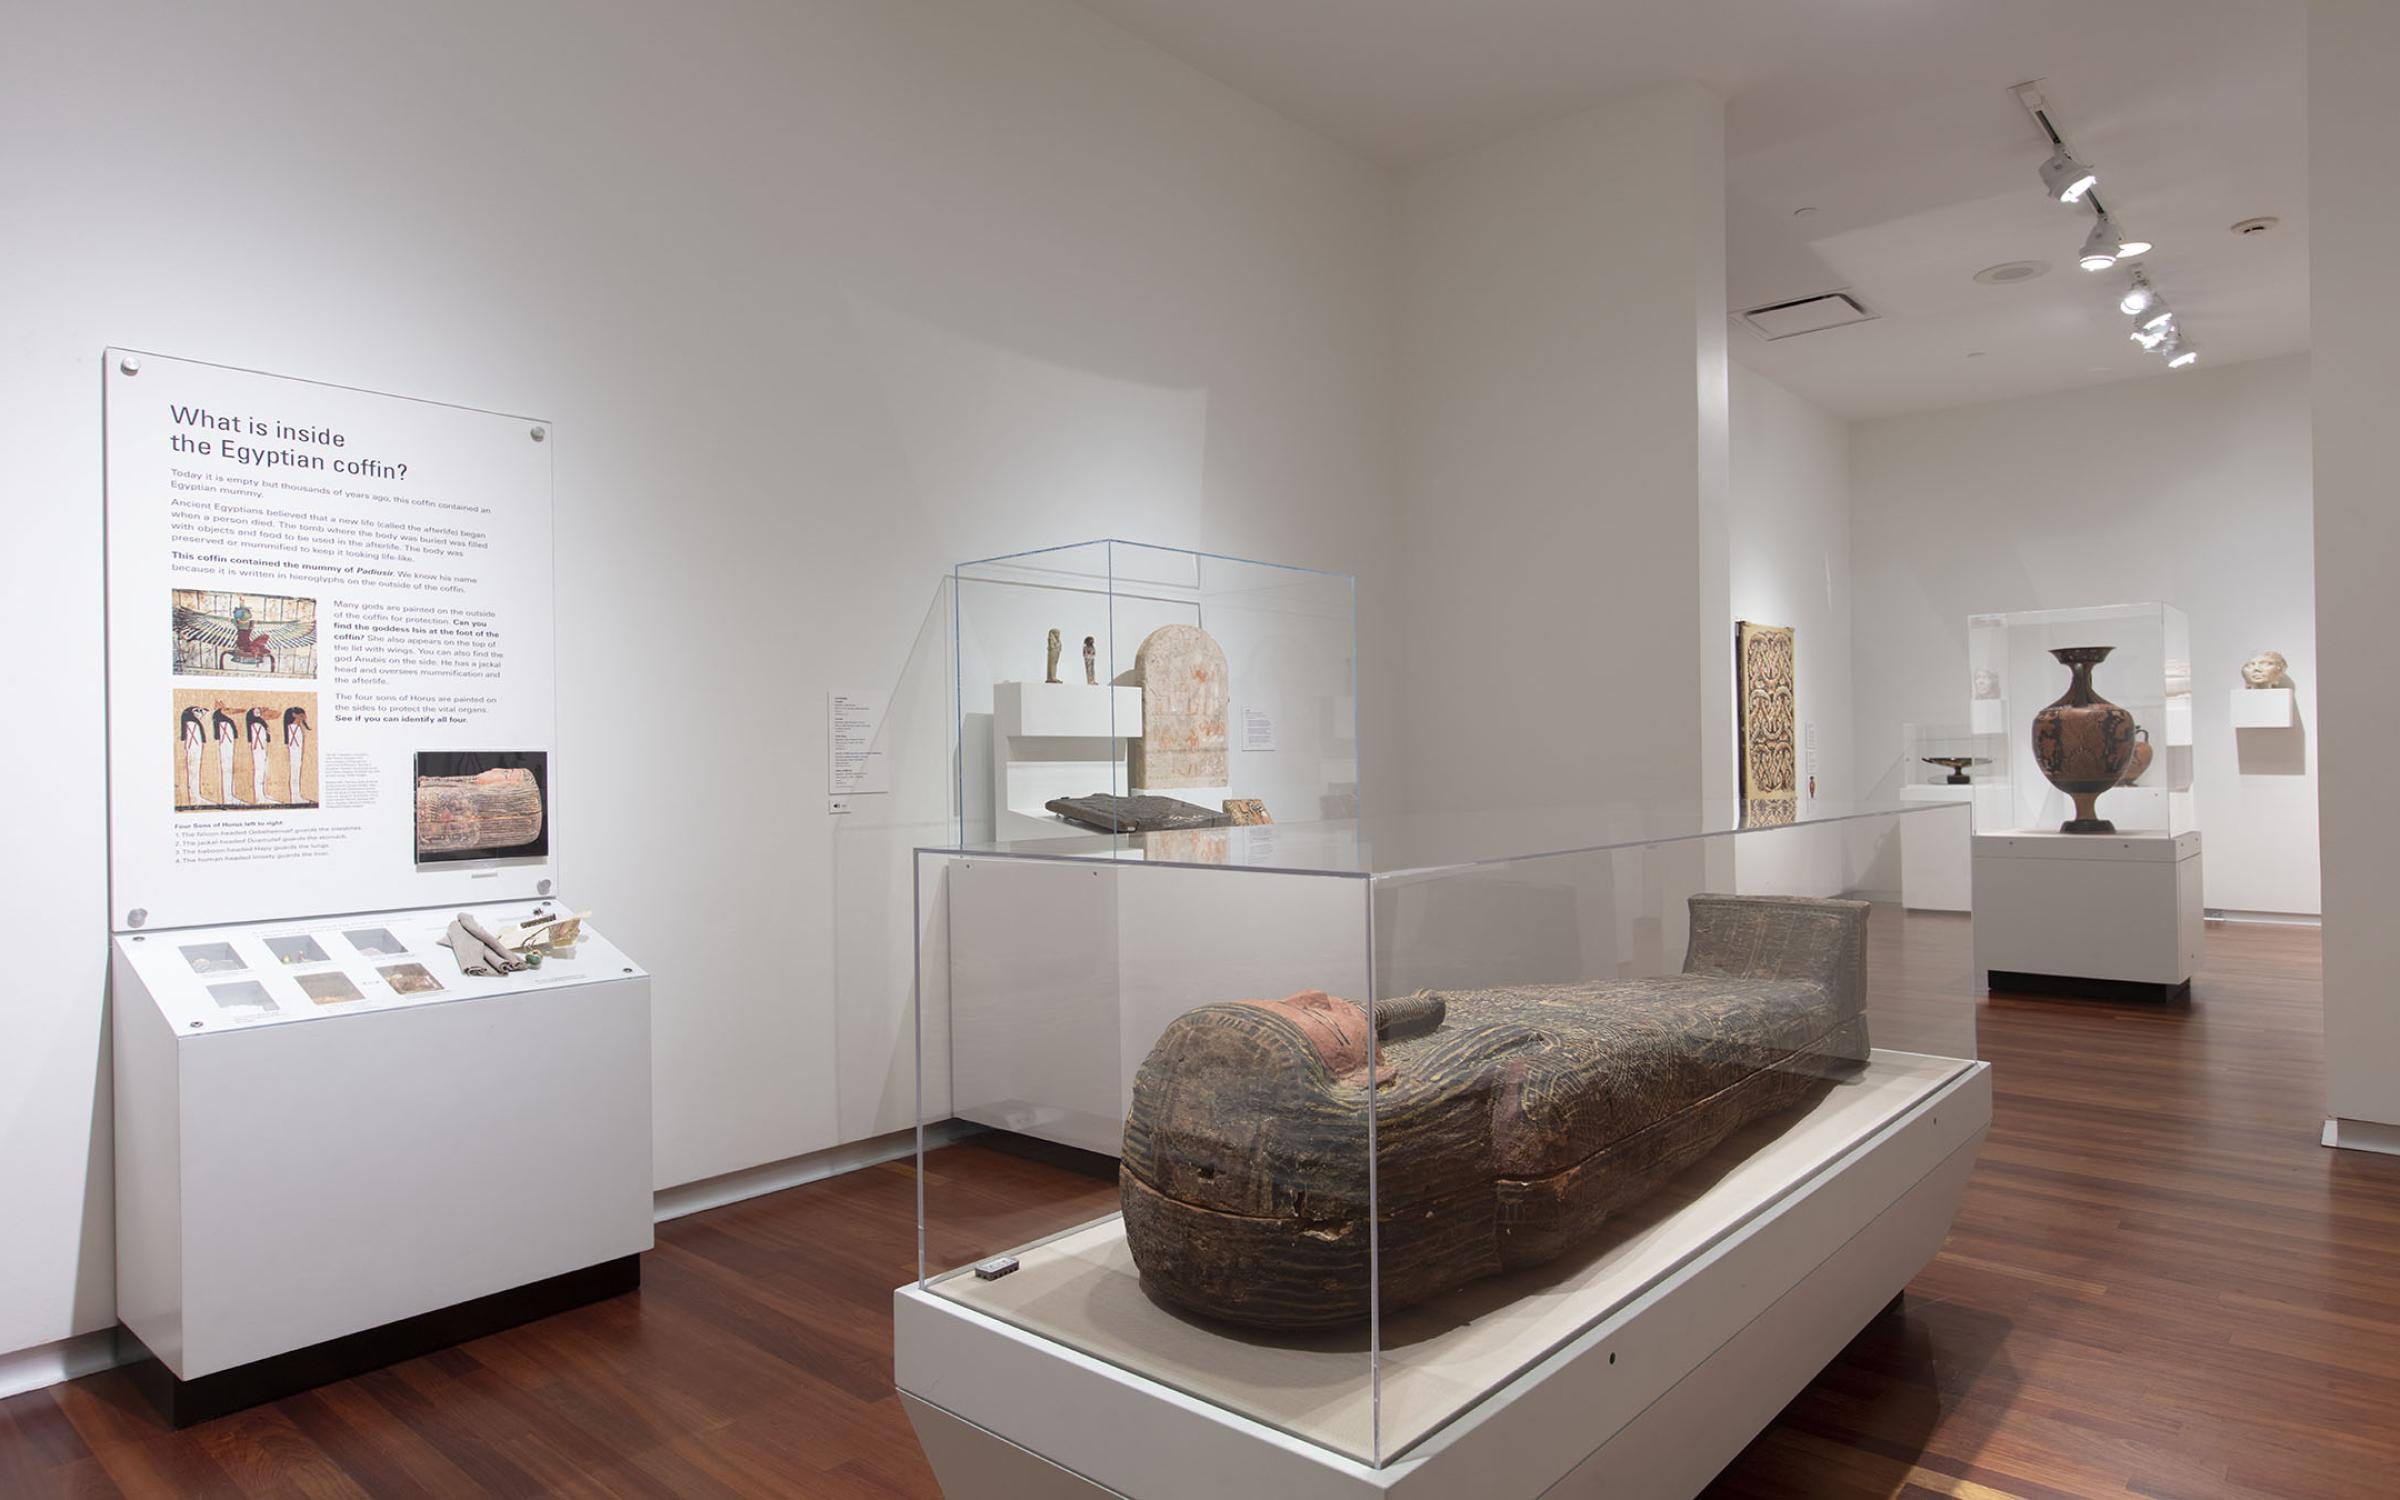 A mummy is lying in a glass case on a white platform. There are other artifacts in the background in their own glass cases against white walls.